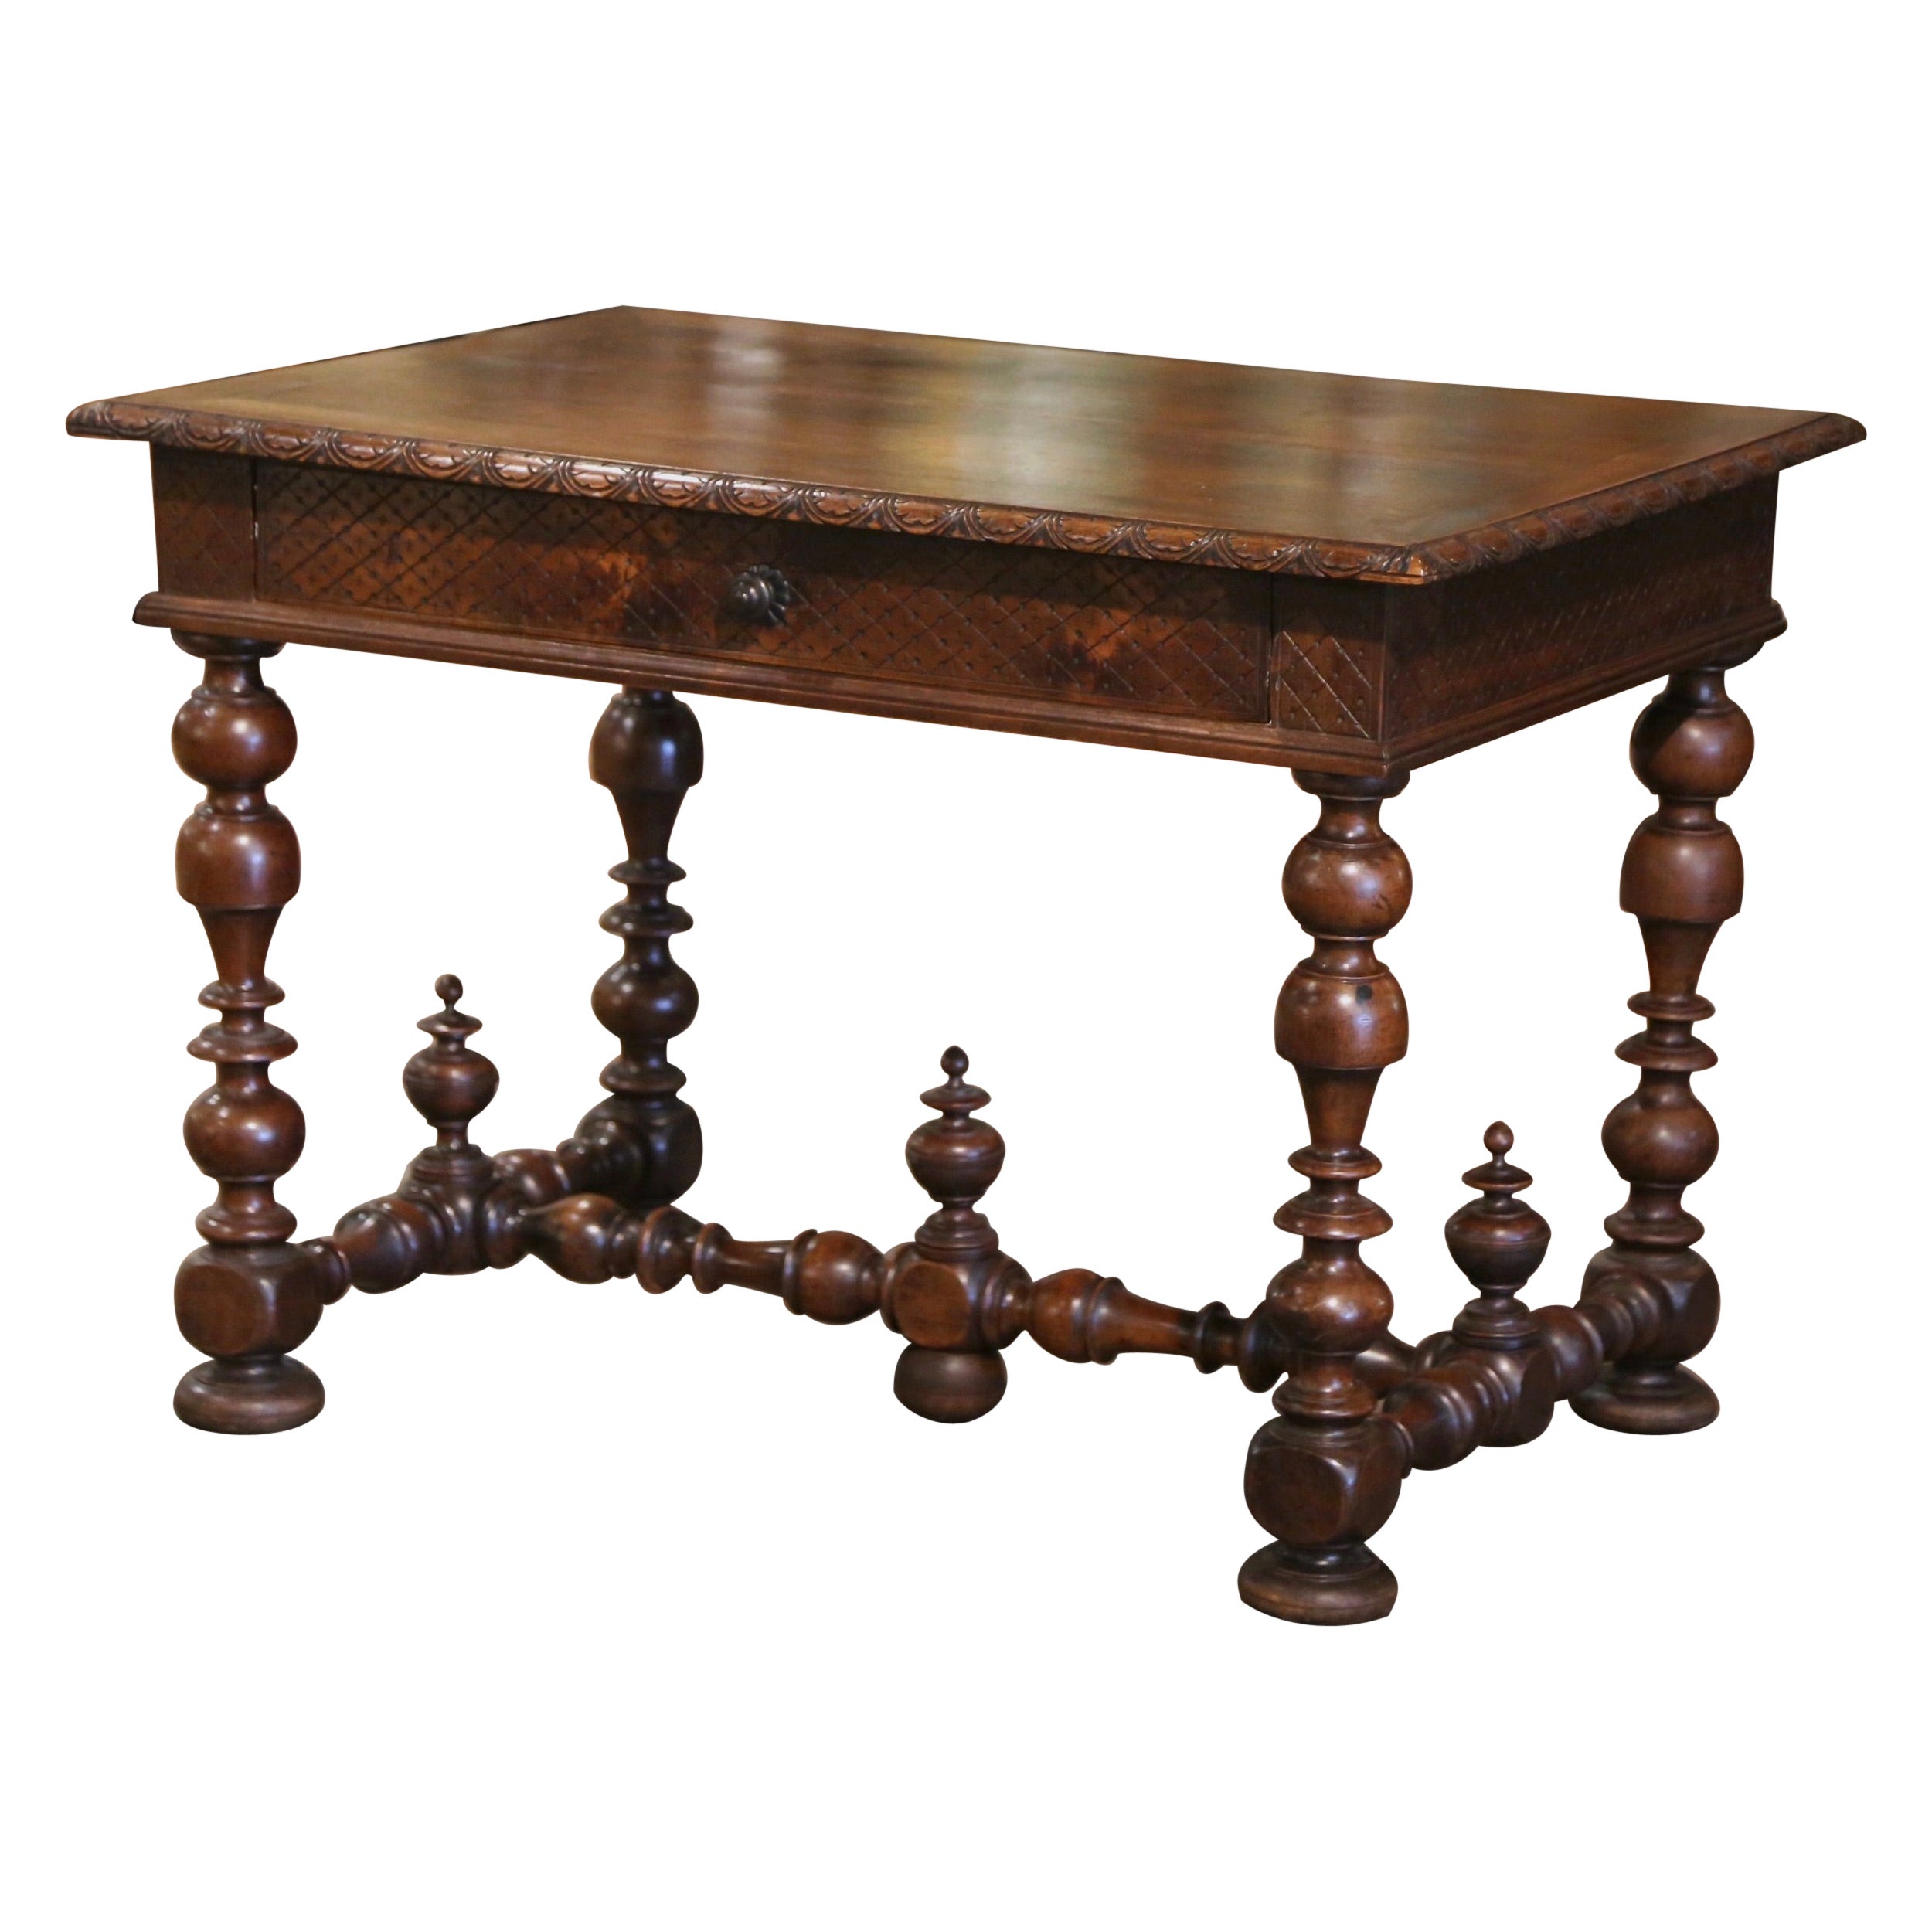 18th Century French Louis XIII Carved Walnut Turned-Leg Side Table with Drawer